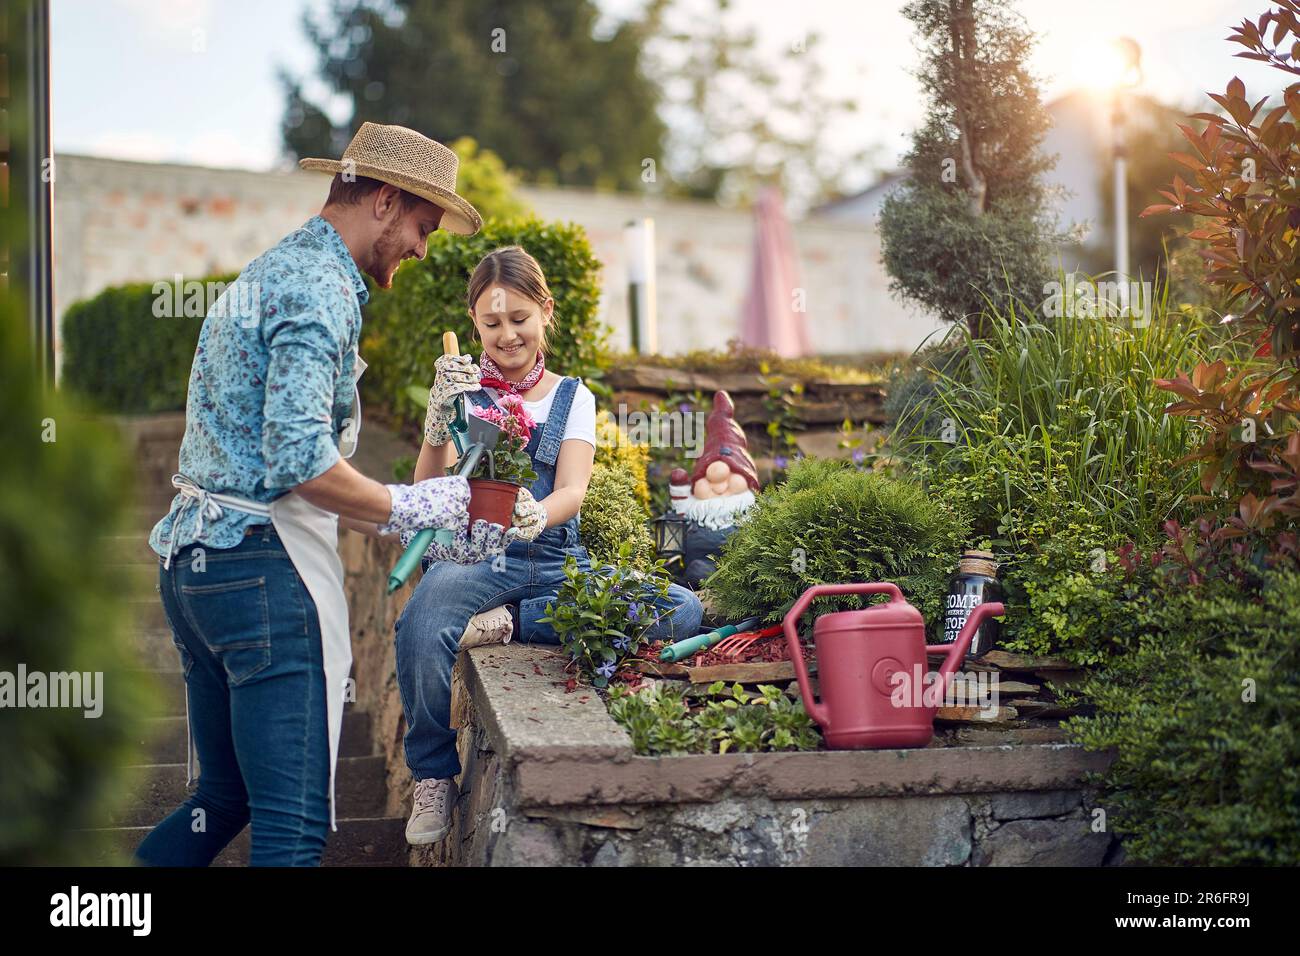 Father and young girl child assisting with re planting a flower from a flower pot, sitting by the flower garden by the house, feeling joyful. Home, fa Stock Photo